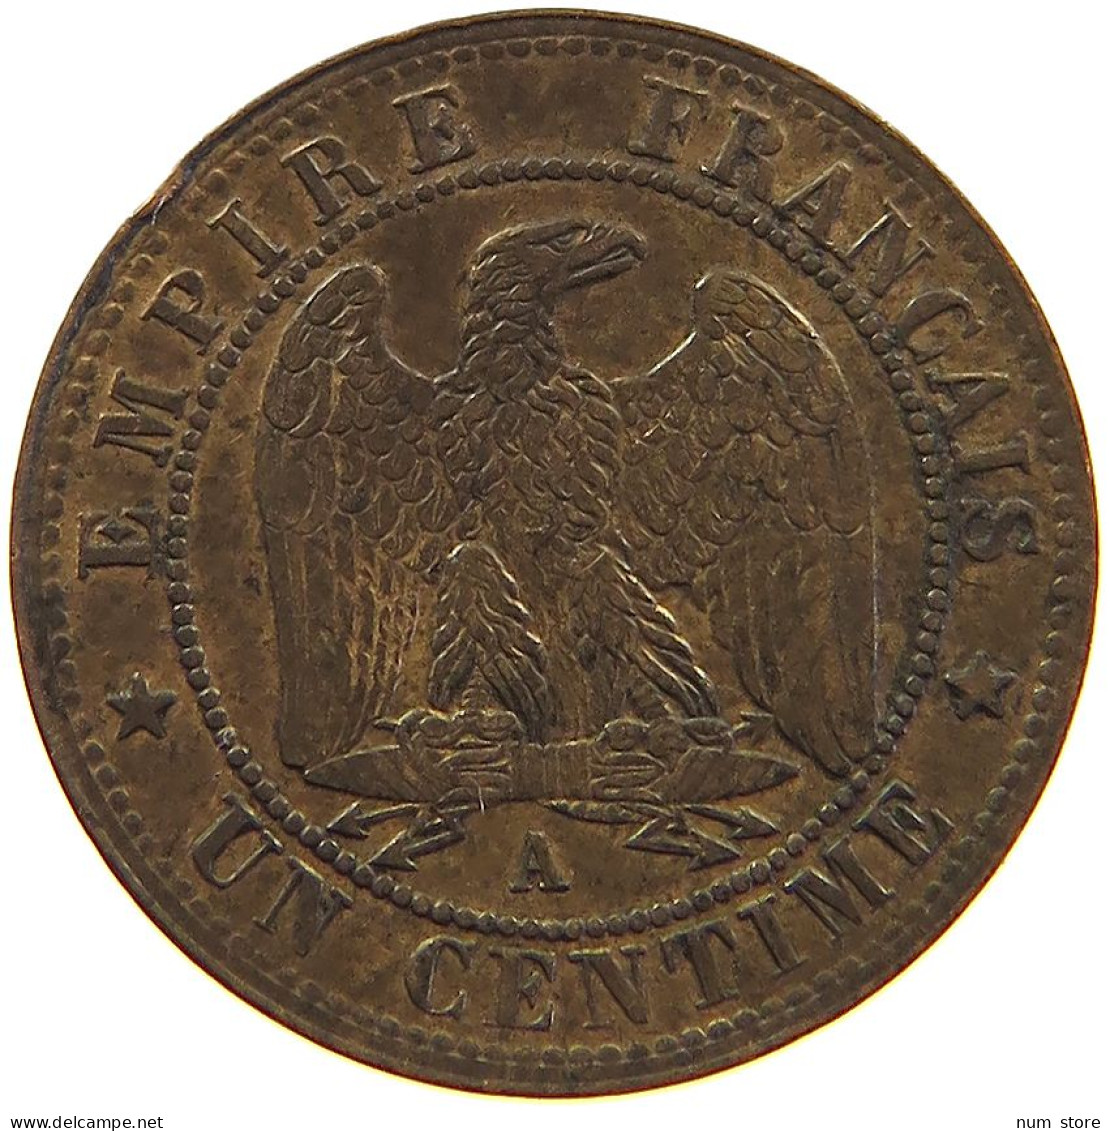 FRANCE CENTIME 1855 A Napoleon III. (1852-1870) #t016 0227 - 1 Centime